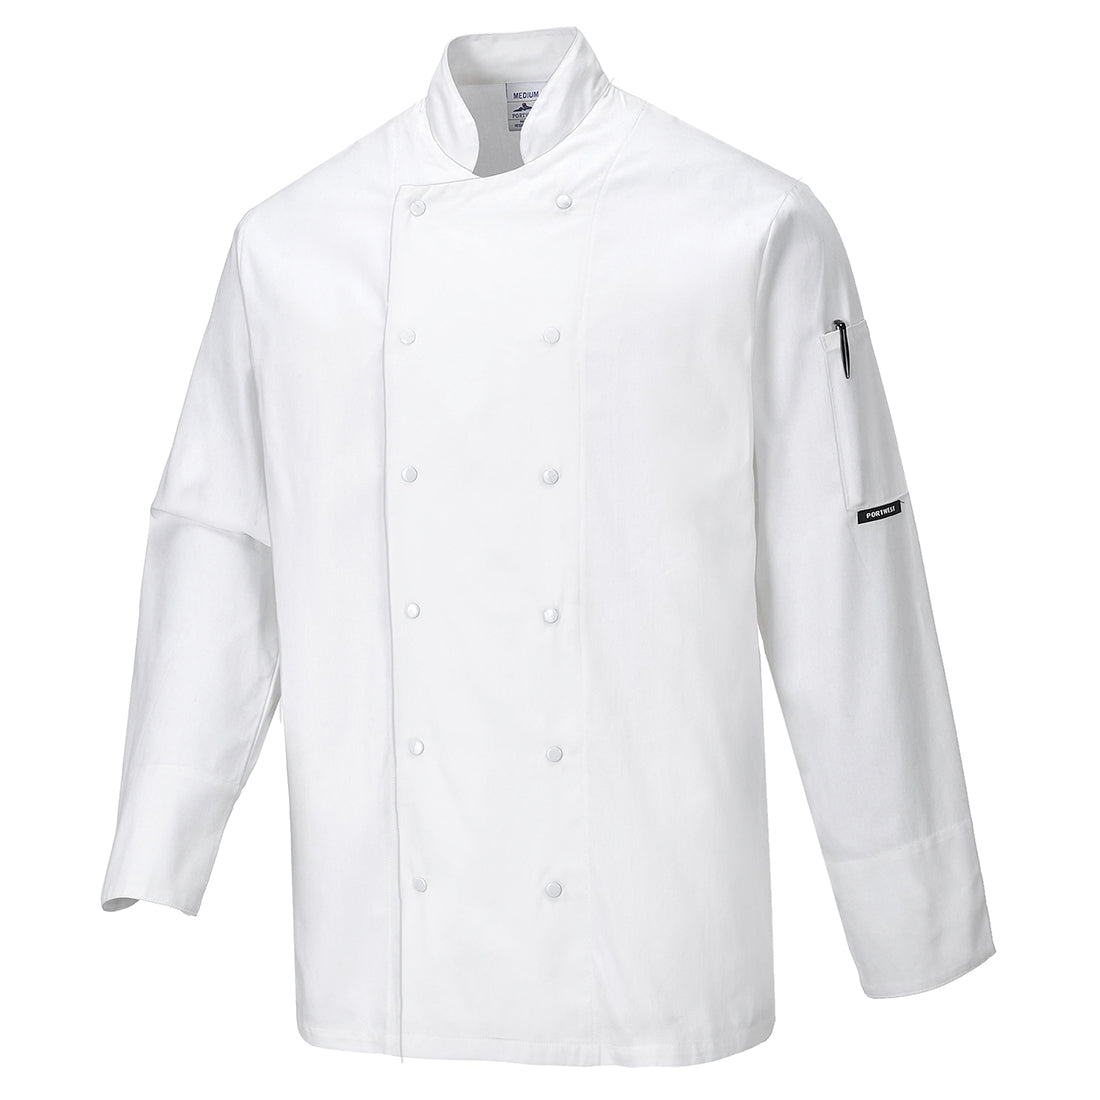 Portwest C773 Dundee Chefs Jacket for Chefswear